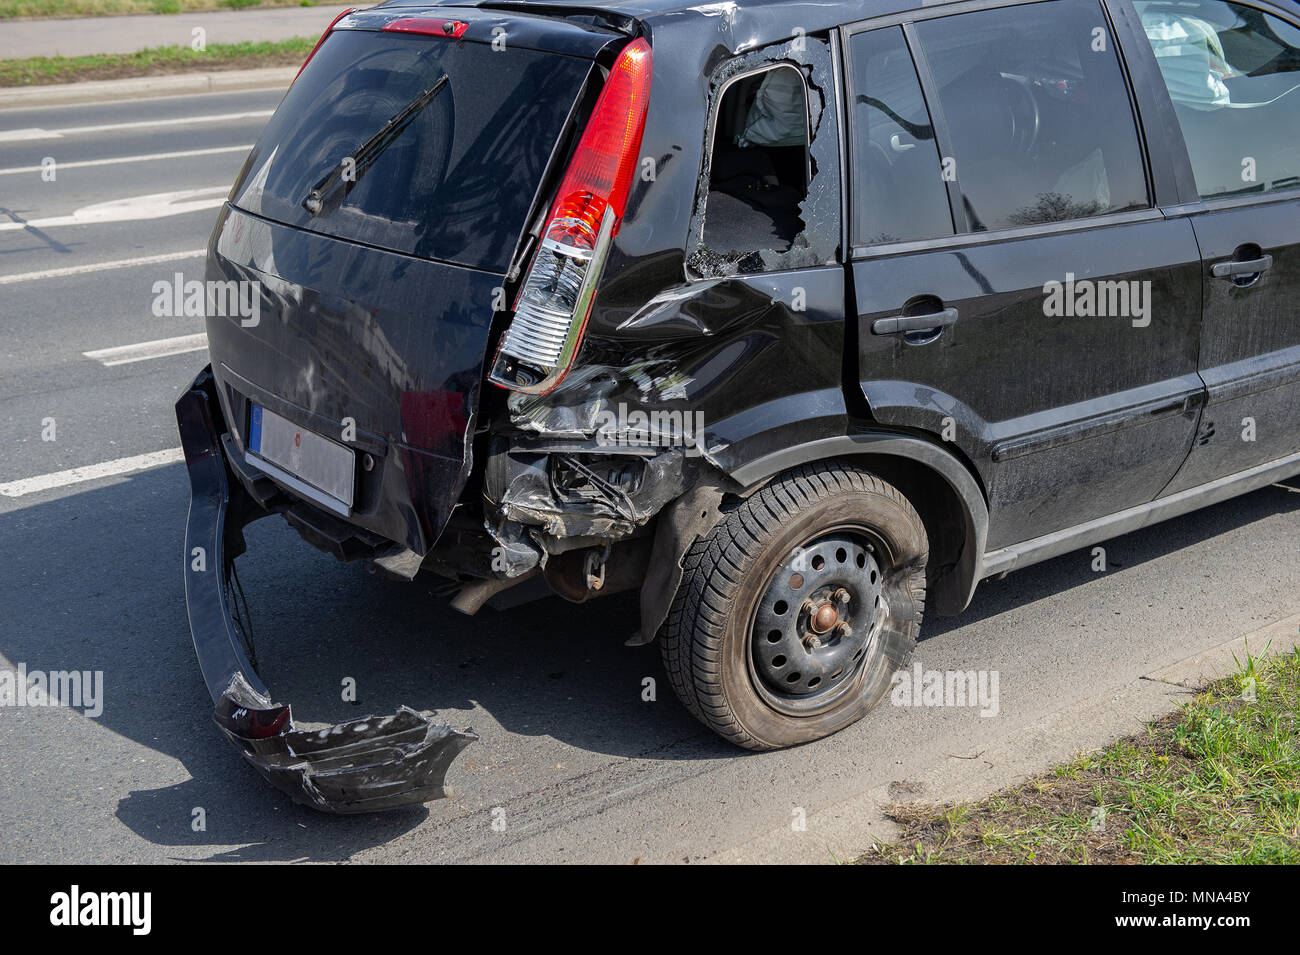 car crash accident on street, damaged automobile after collision in city Stock Photo